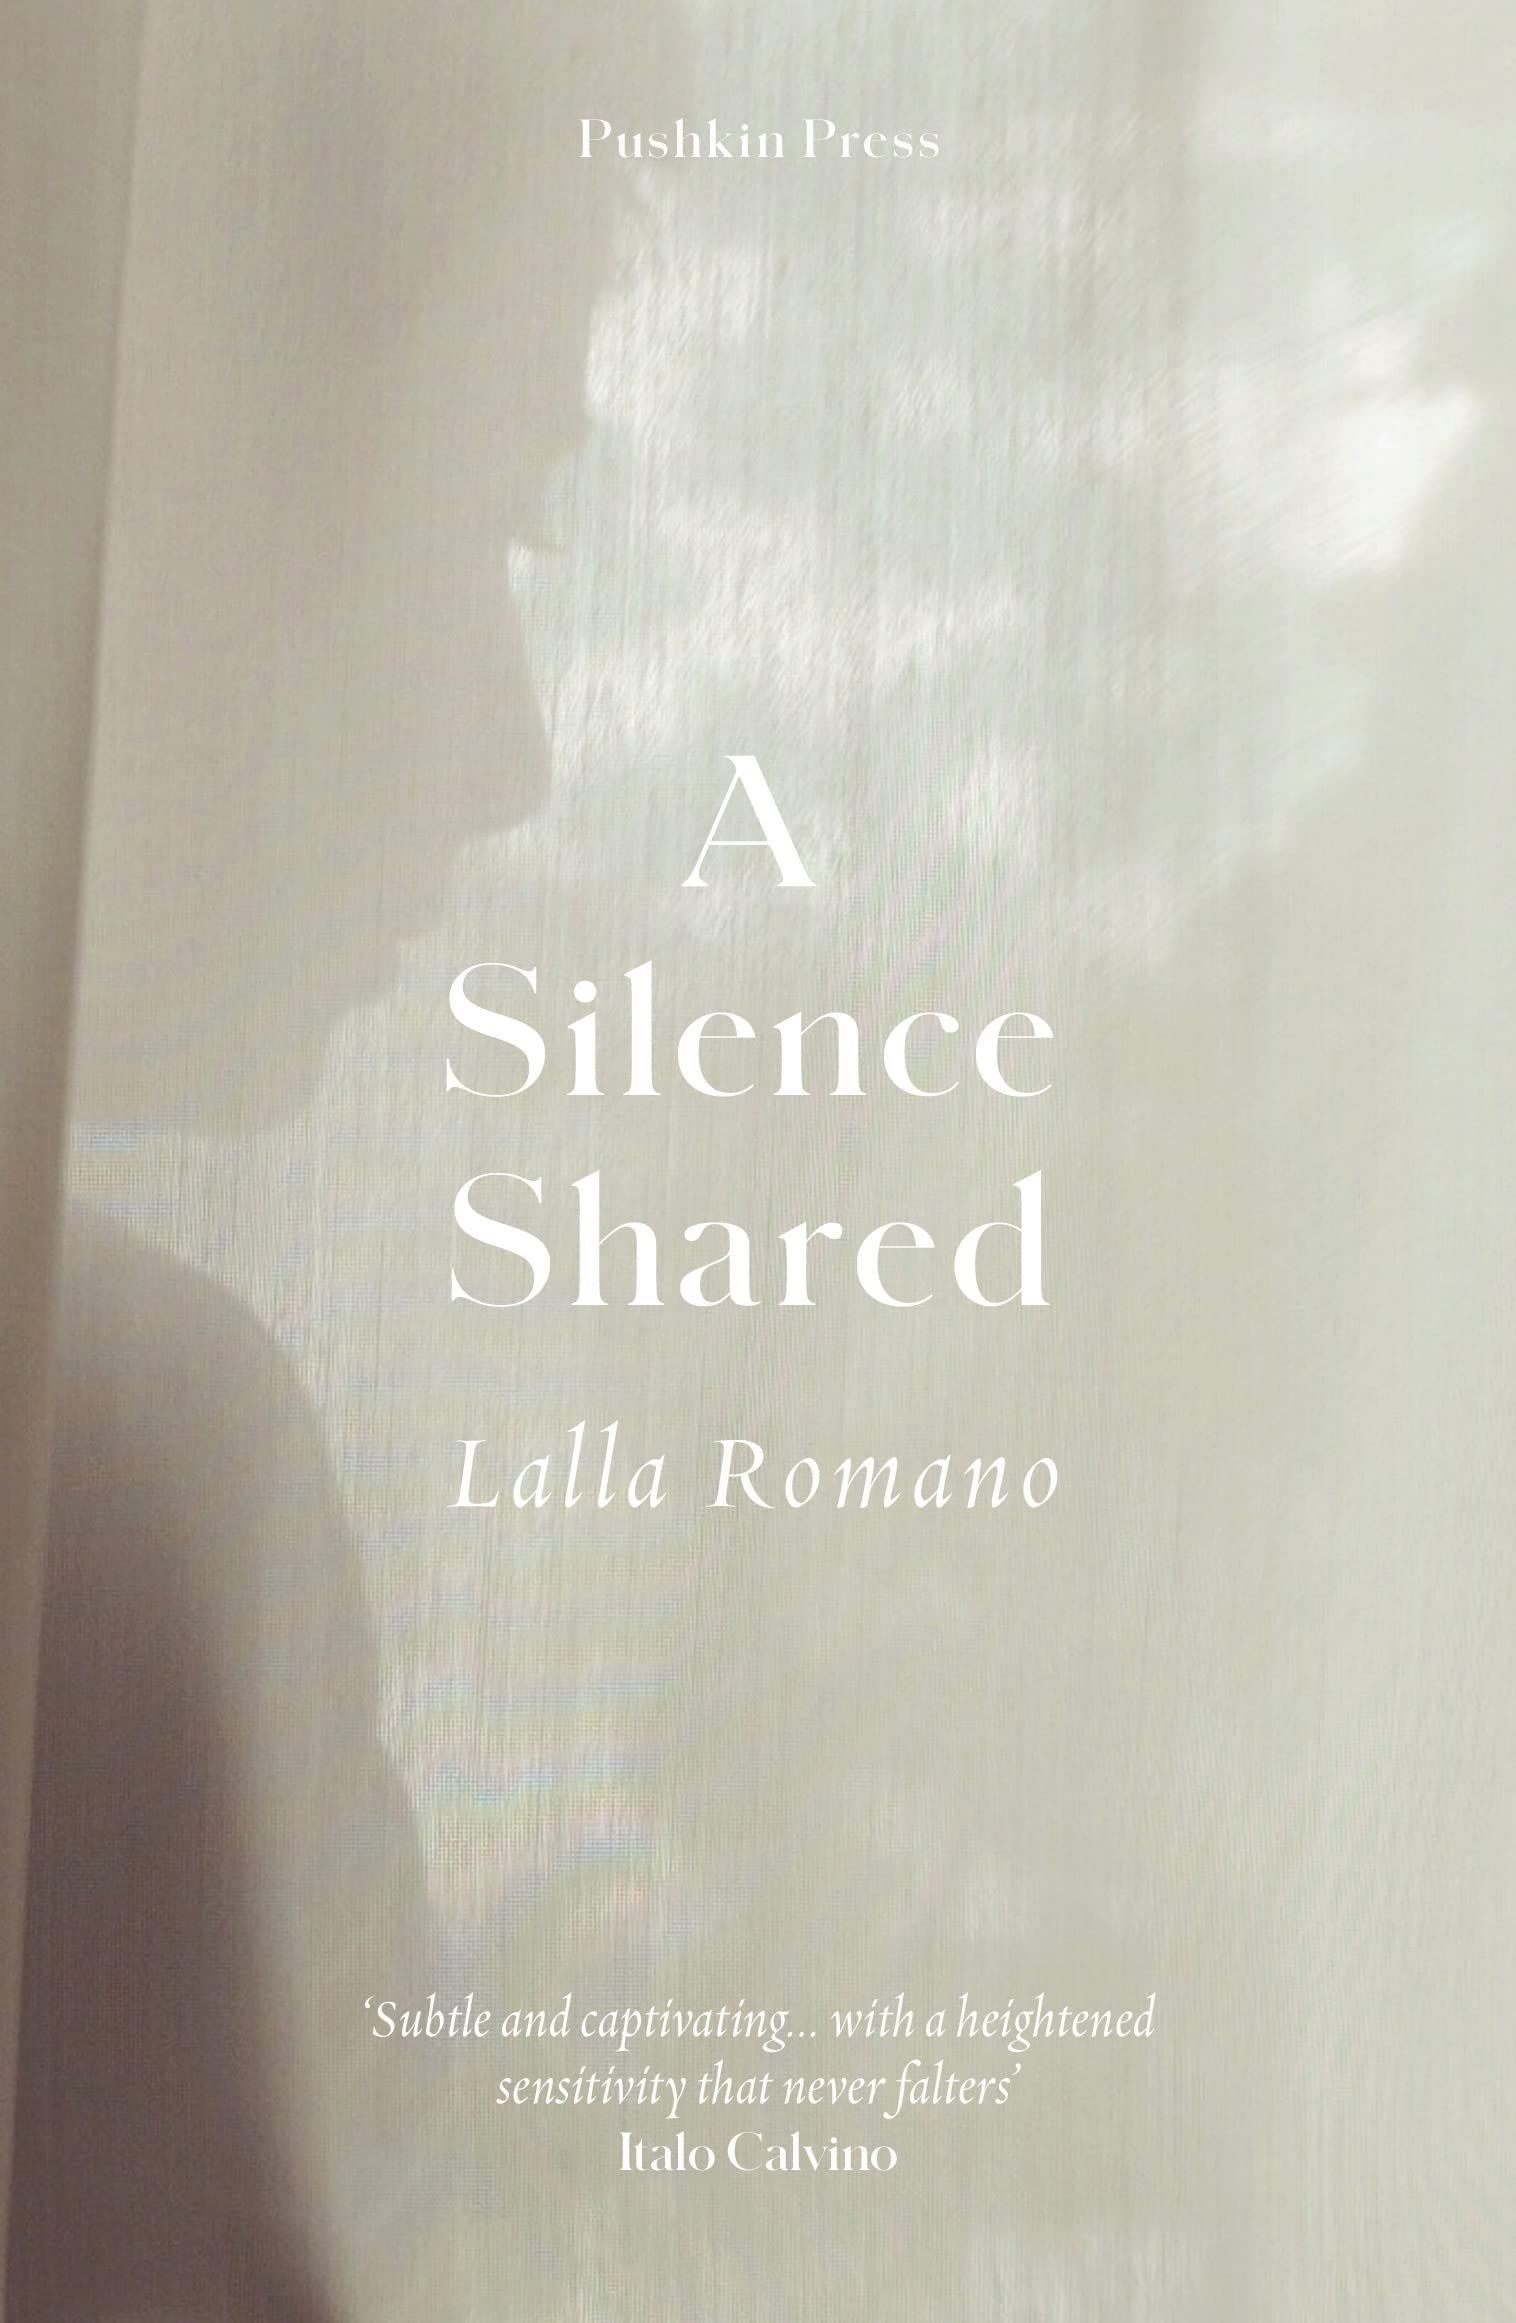 We Invent the People We Love: On Lalla Romano’s “A Silence Shared”